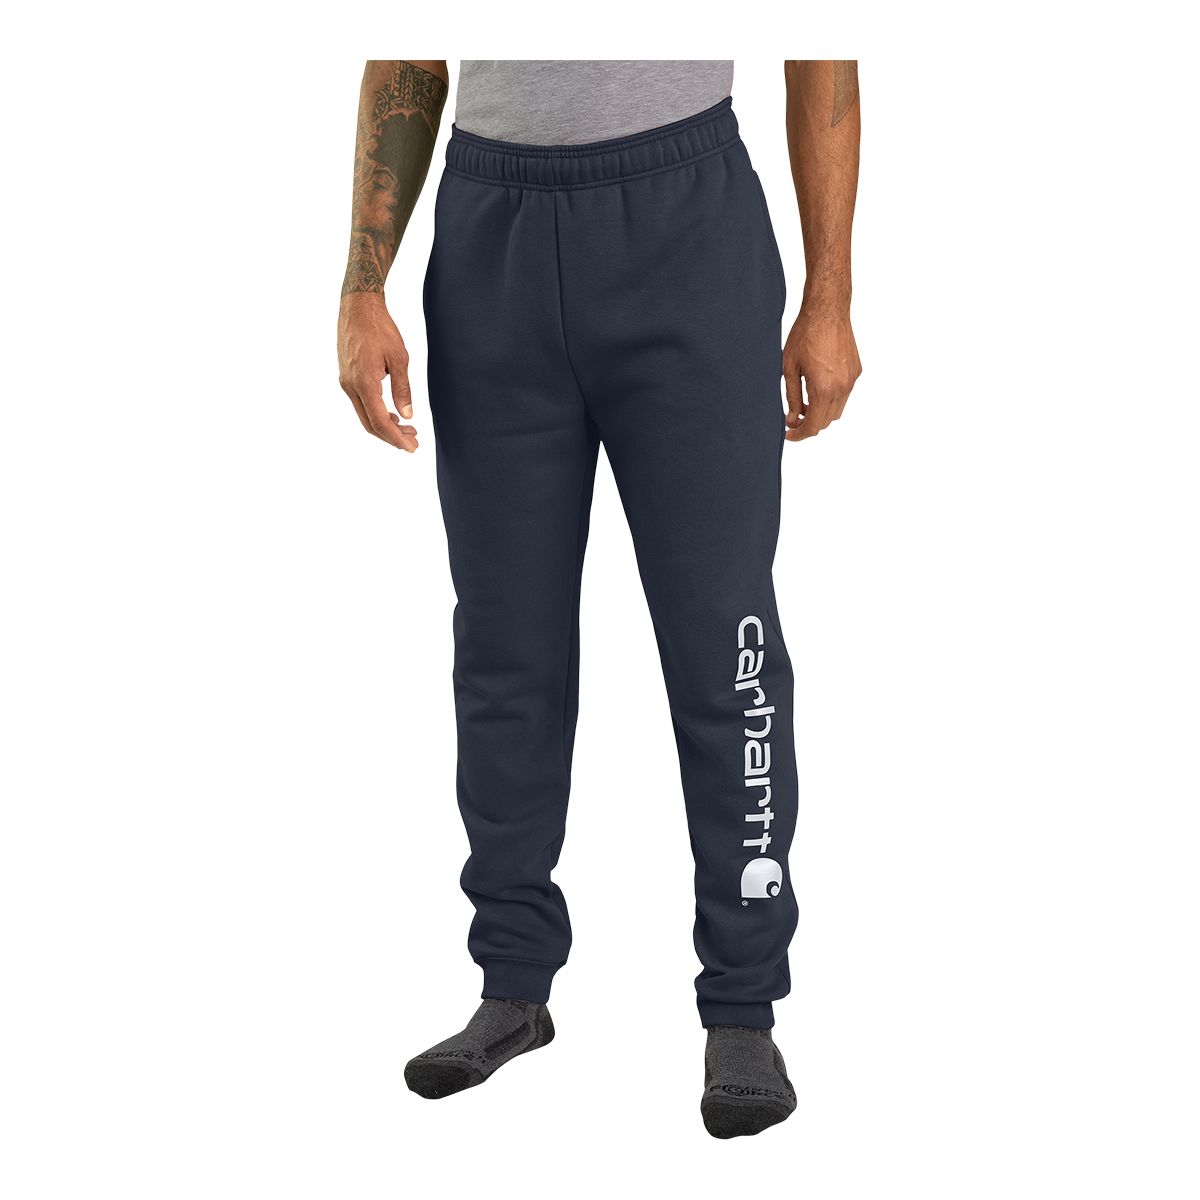 Image of Carhartt Men's Relaxed Fit Midweight Logo Pants